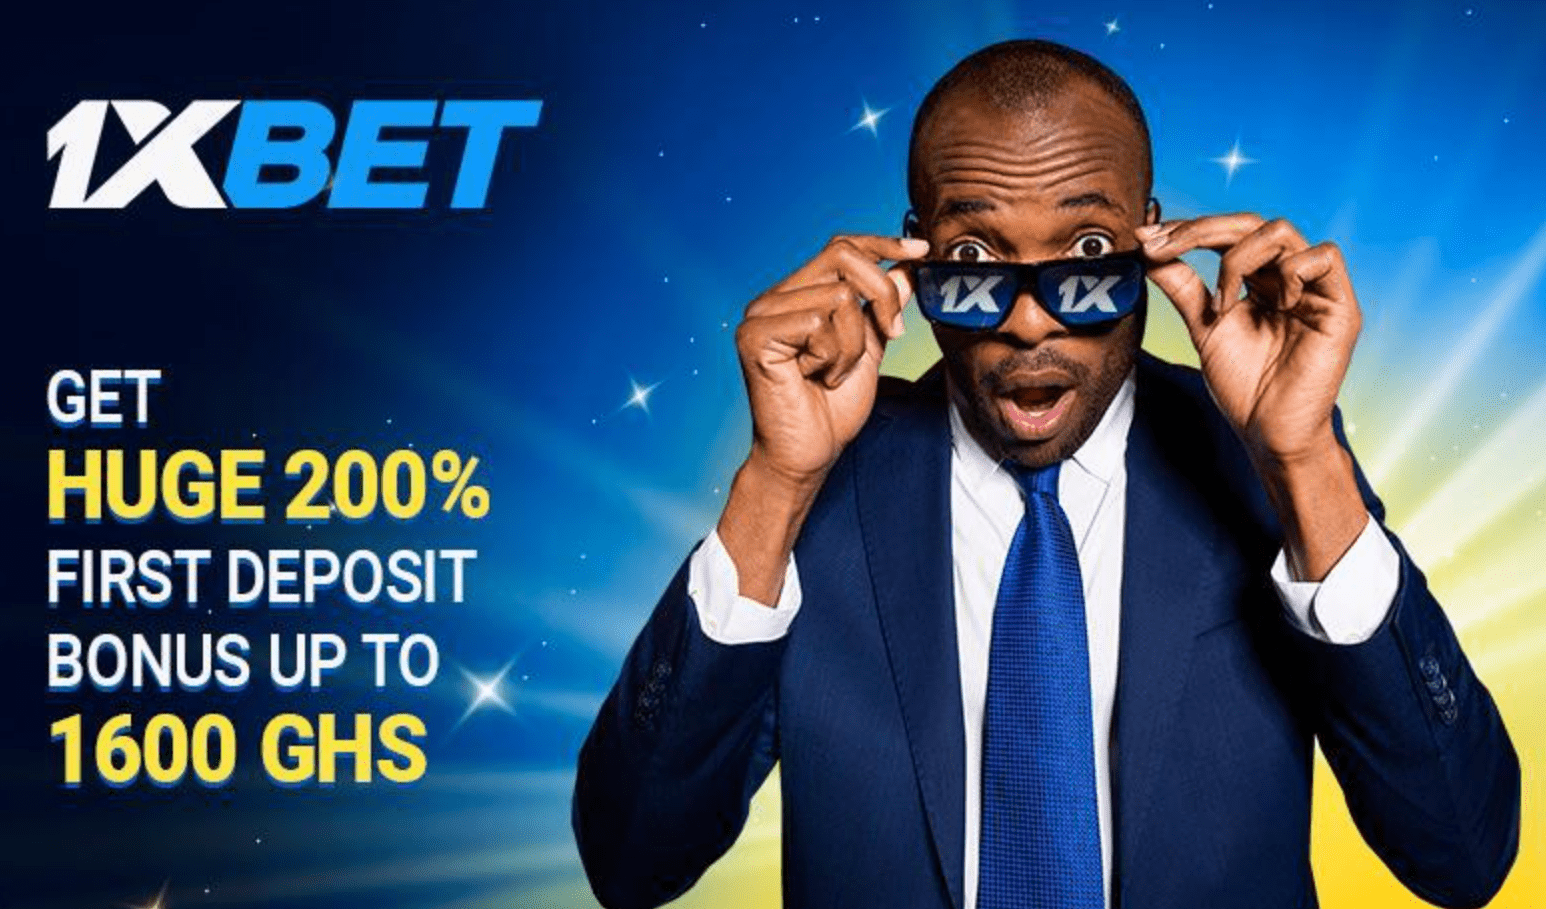 Using Promo Codes on 1xBet gh